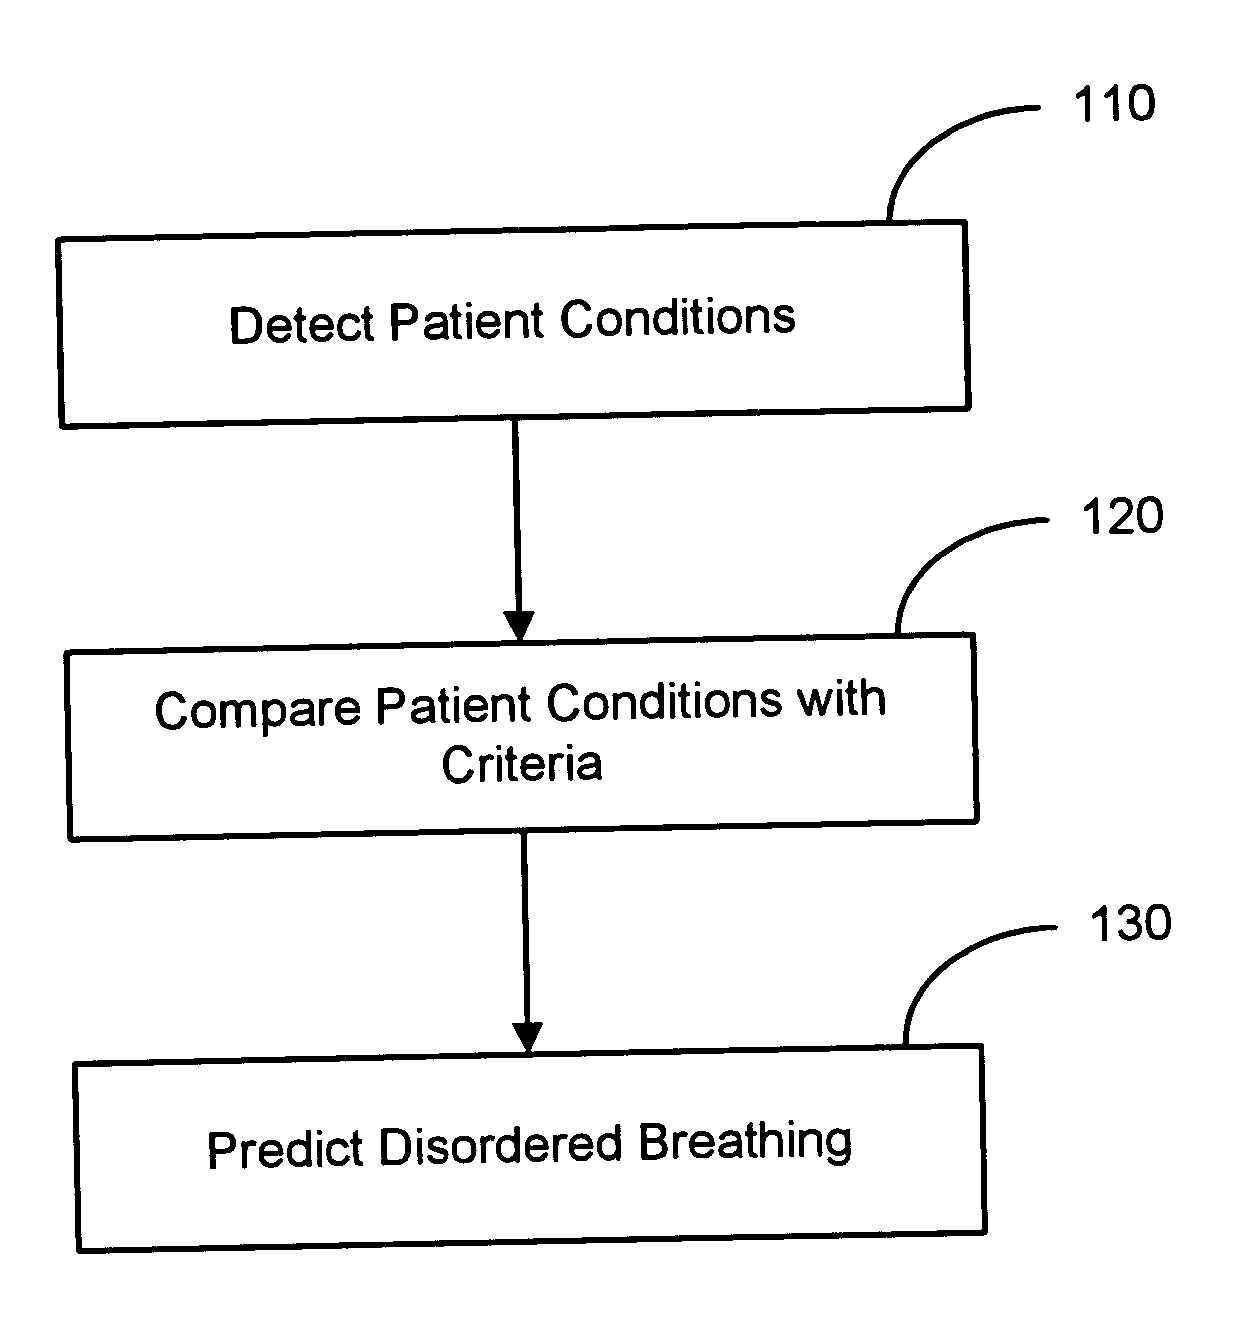 Prediction of disordered breathing